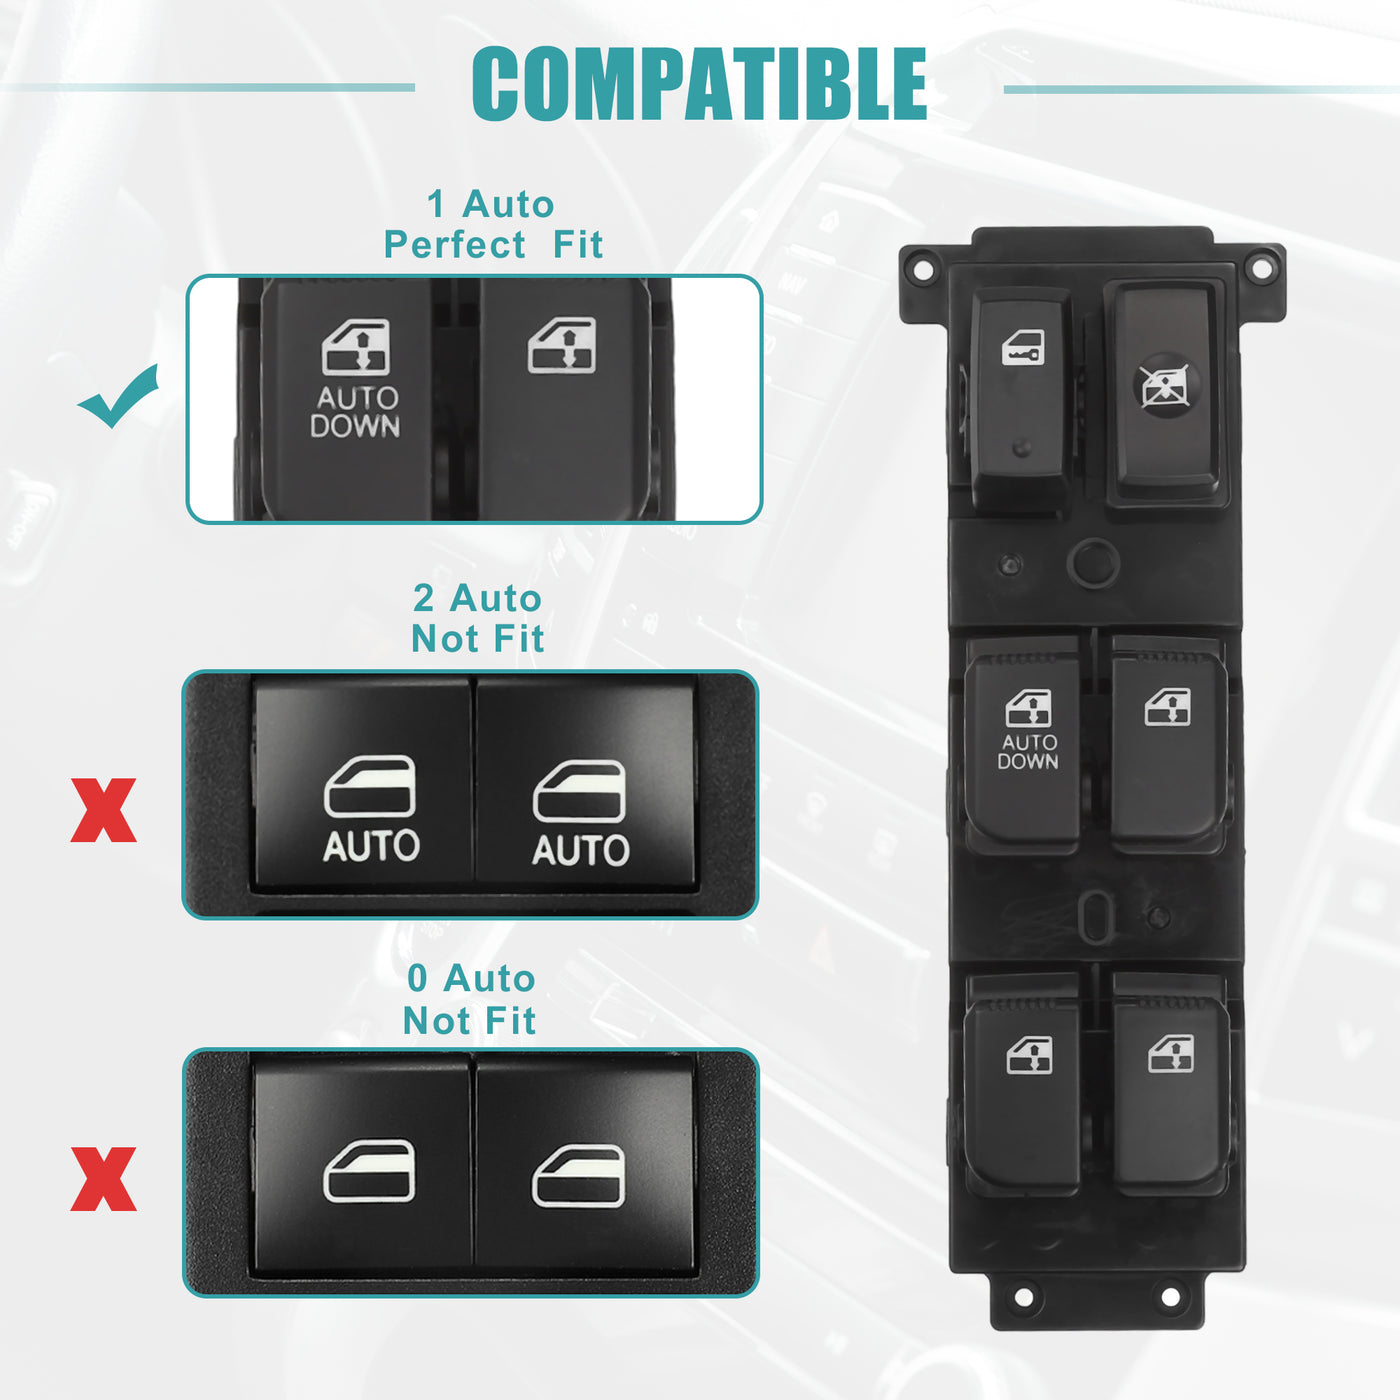 ACROPIX Power Window Switch Window Control Switch Fit for Hyundai Santa Fe 2007-2009 with Removal Tool No.935702B100S4 - Pack of 1